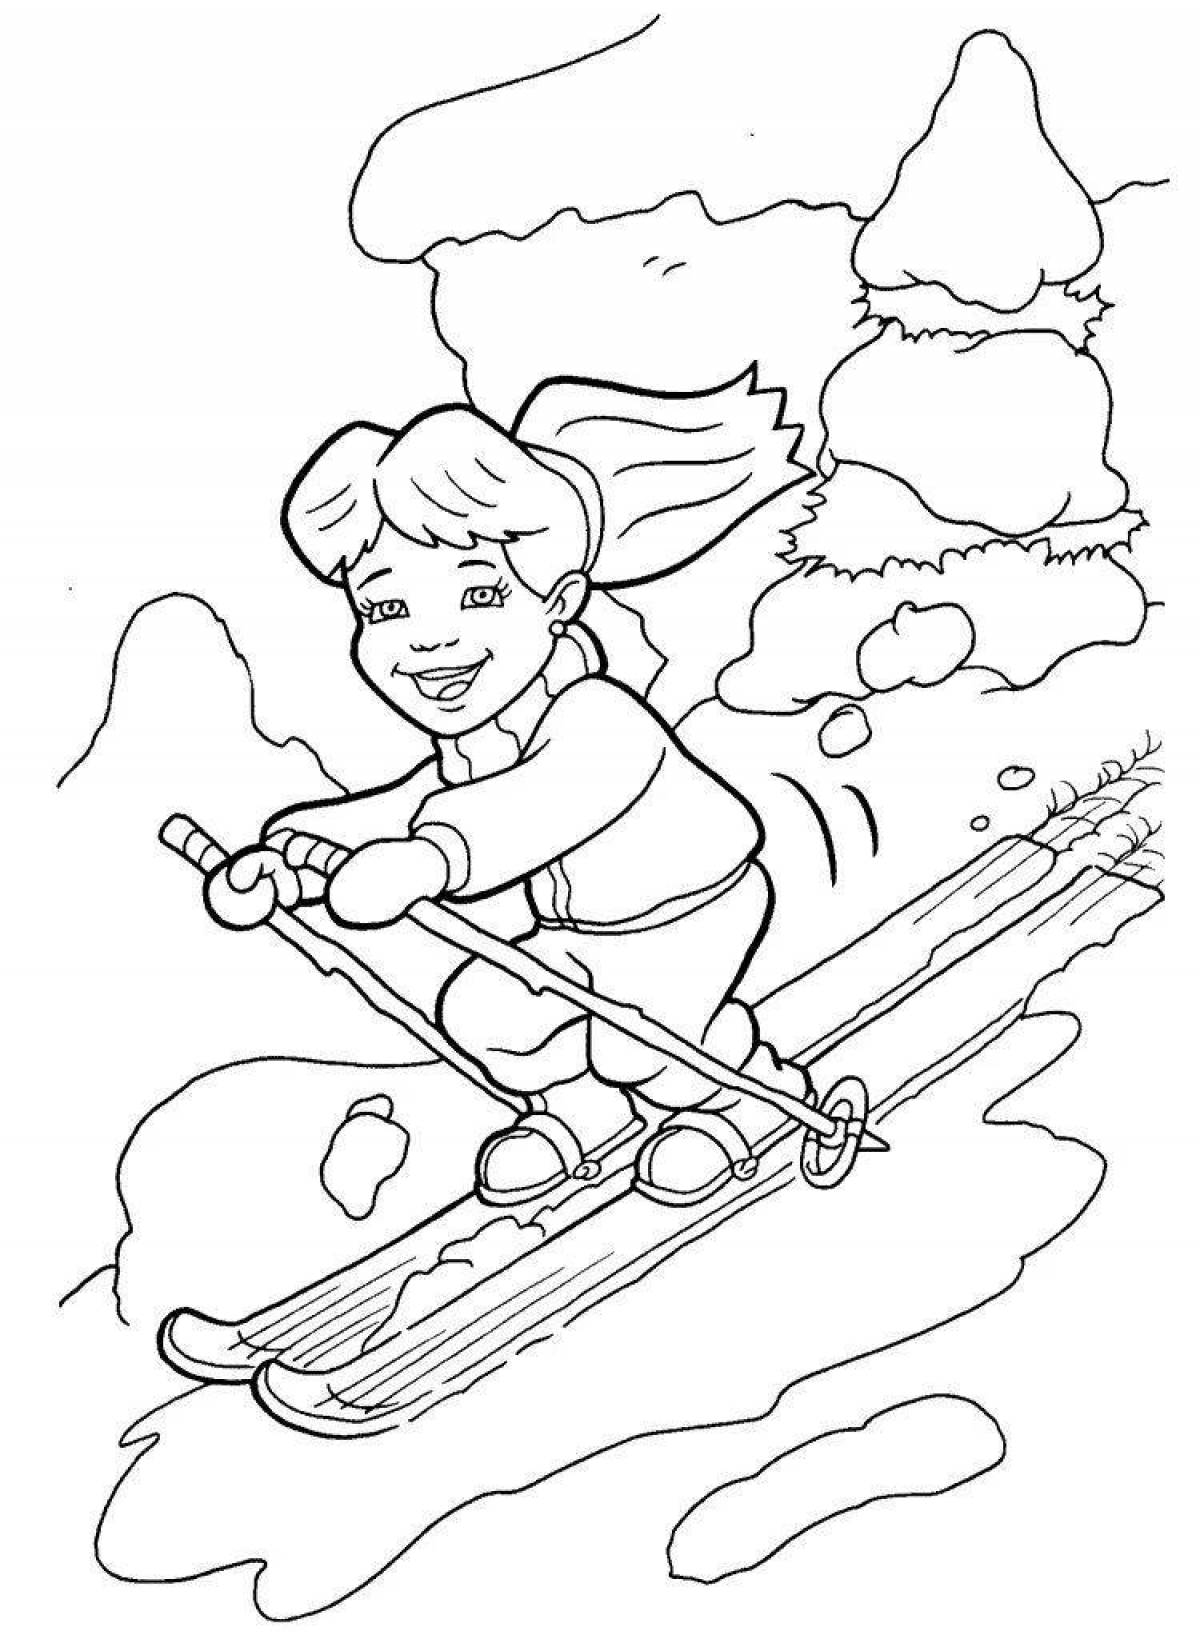 Lovely winter sports coloring page for kids